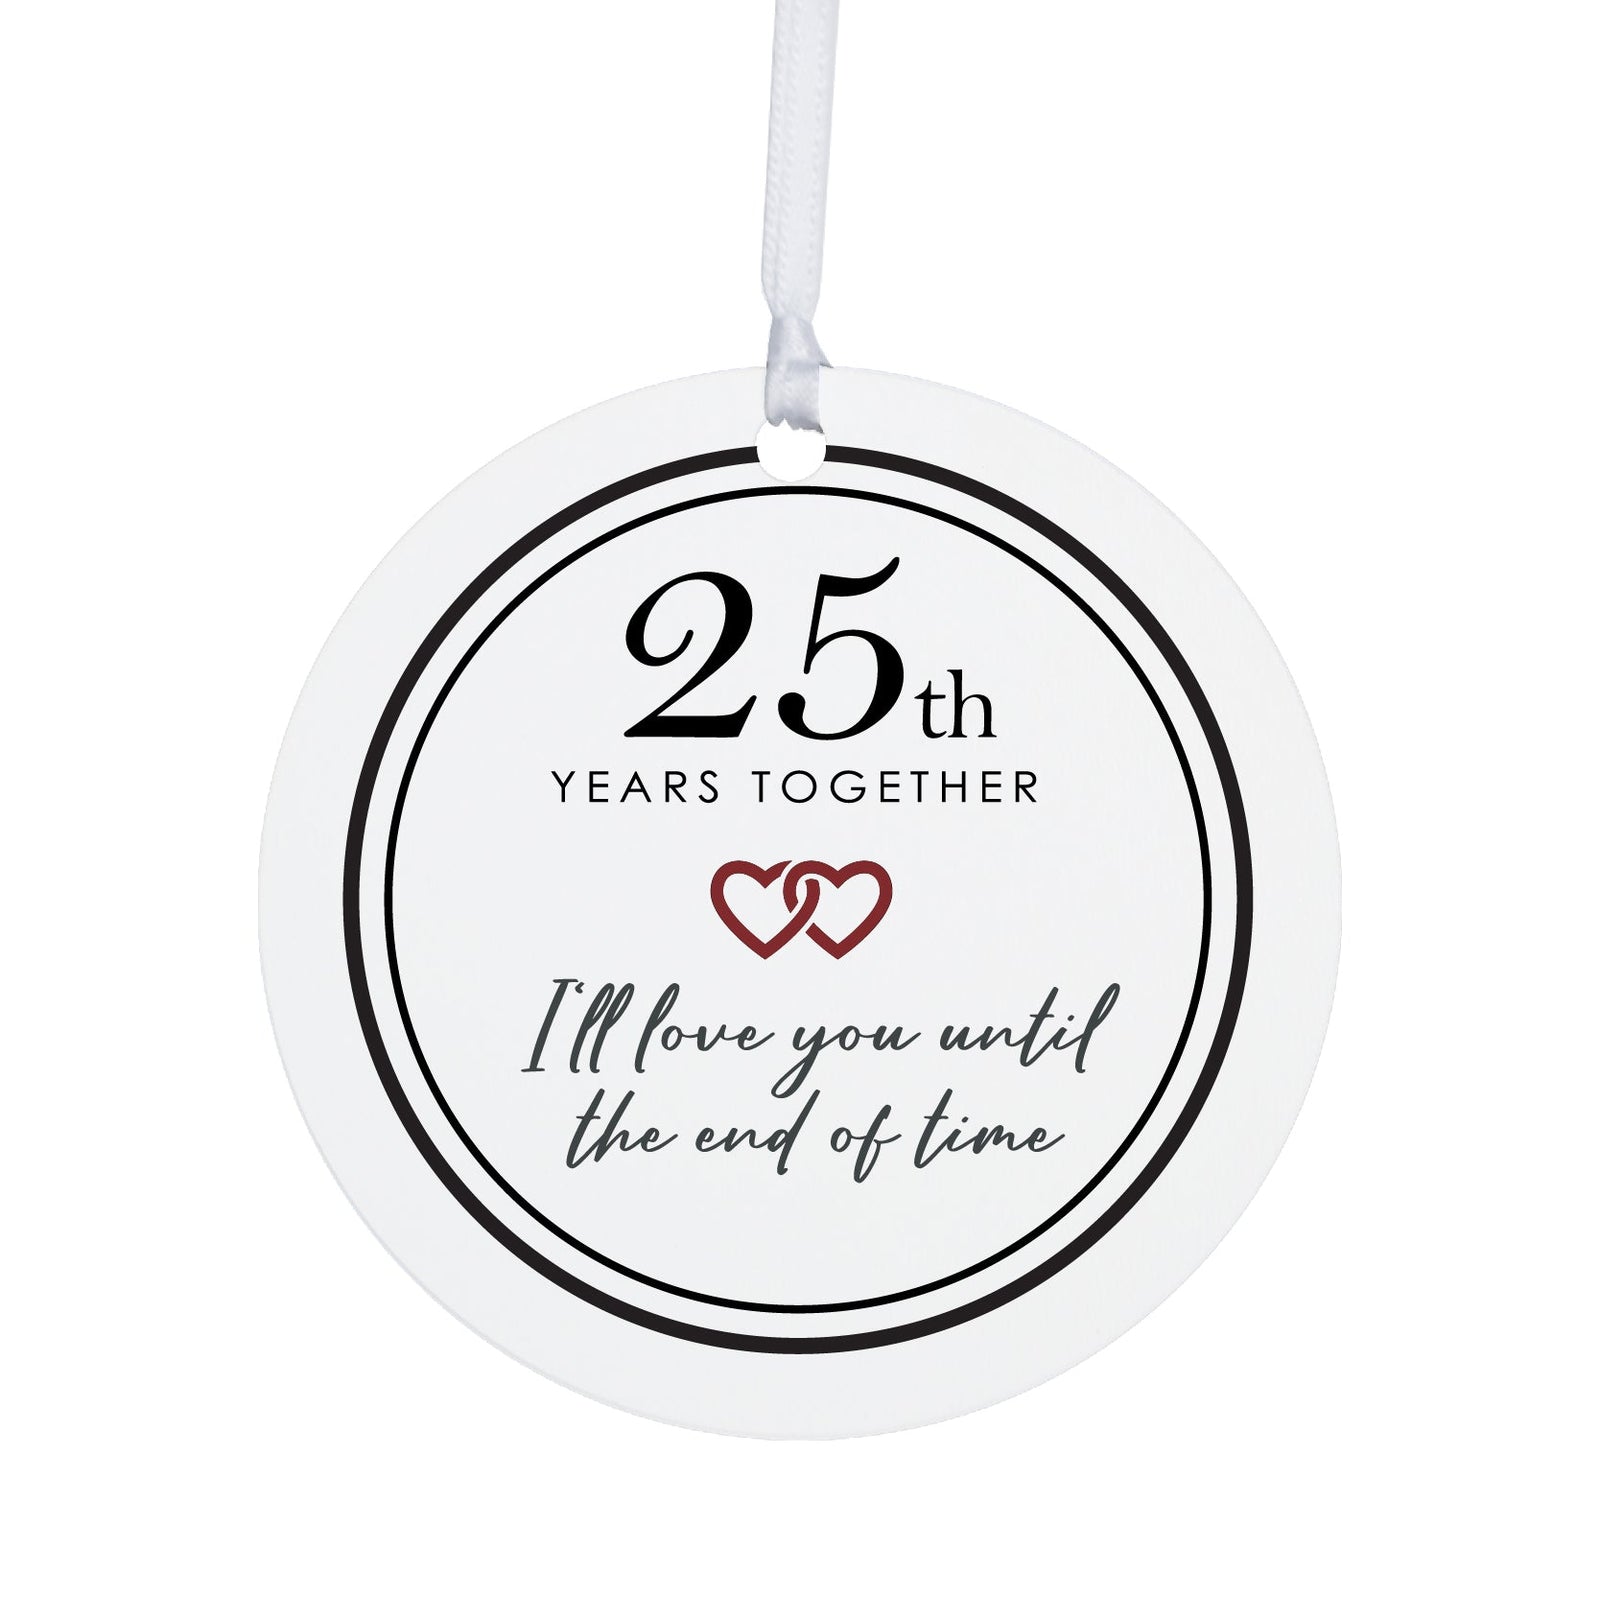 25th-Year Together Wedding Anniversary White Ornament With Inspirational Message Gift Ideas - I Love You Till The End Of Time - LifeSong Milestones